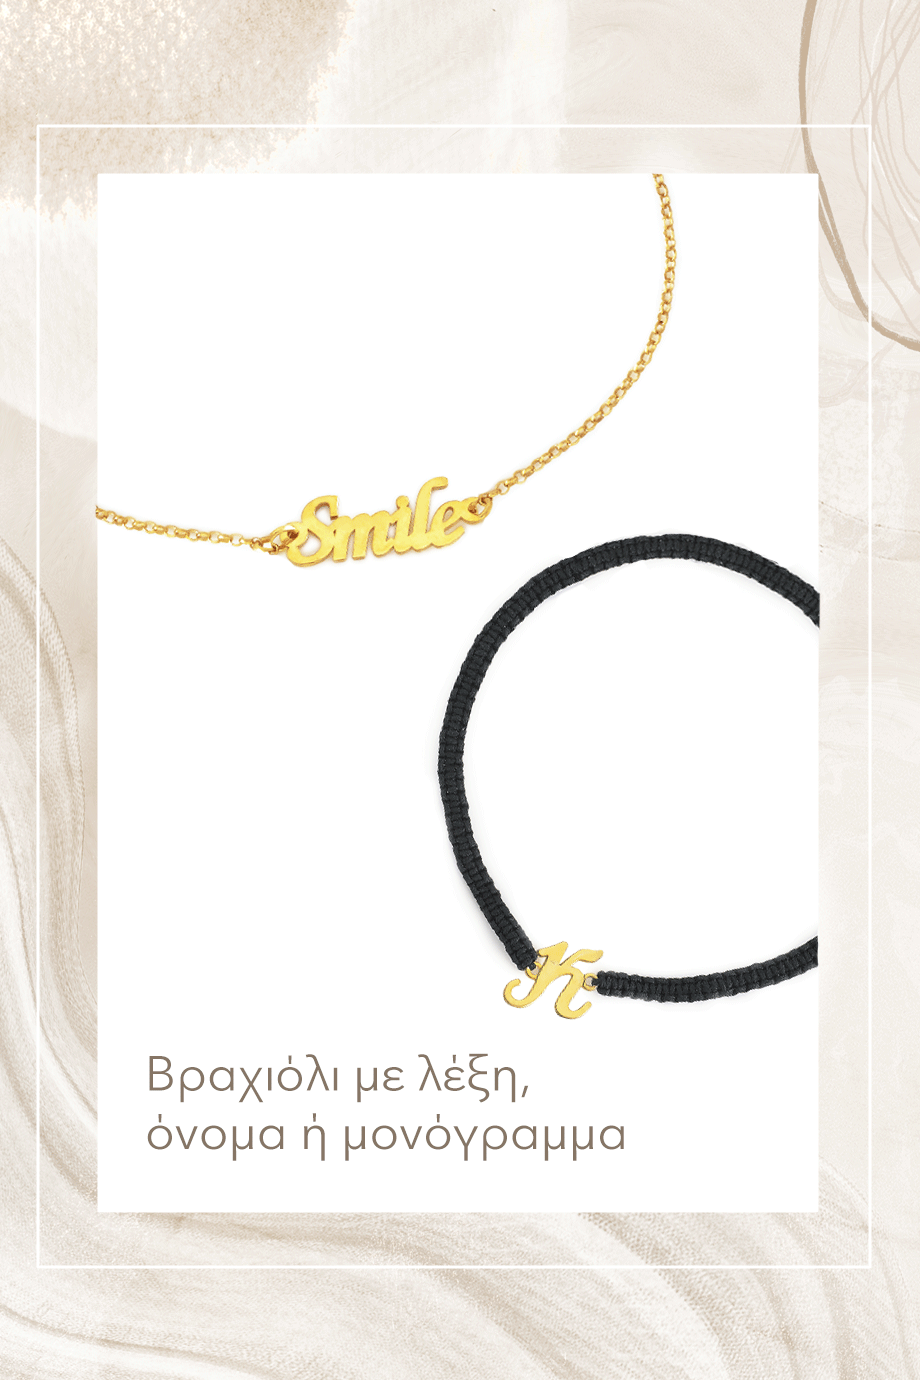 Make your own bracelet with your name, a word or a monogram